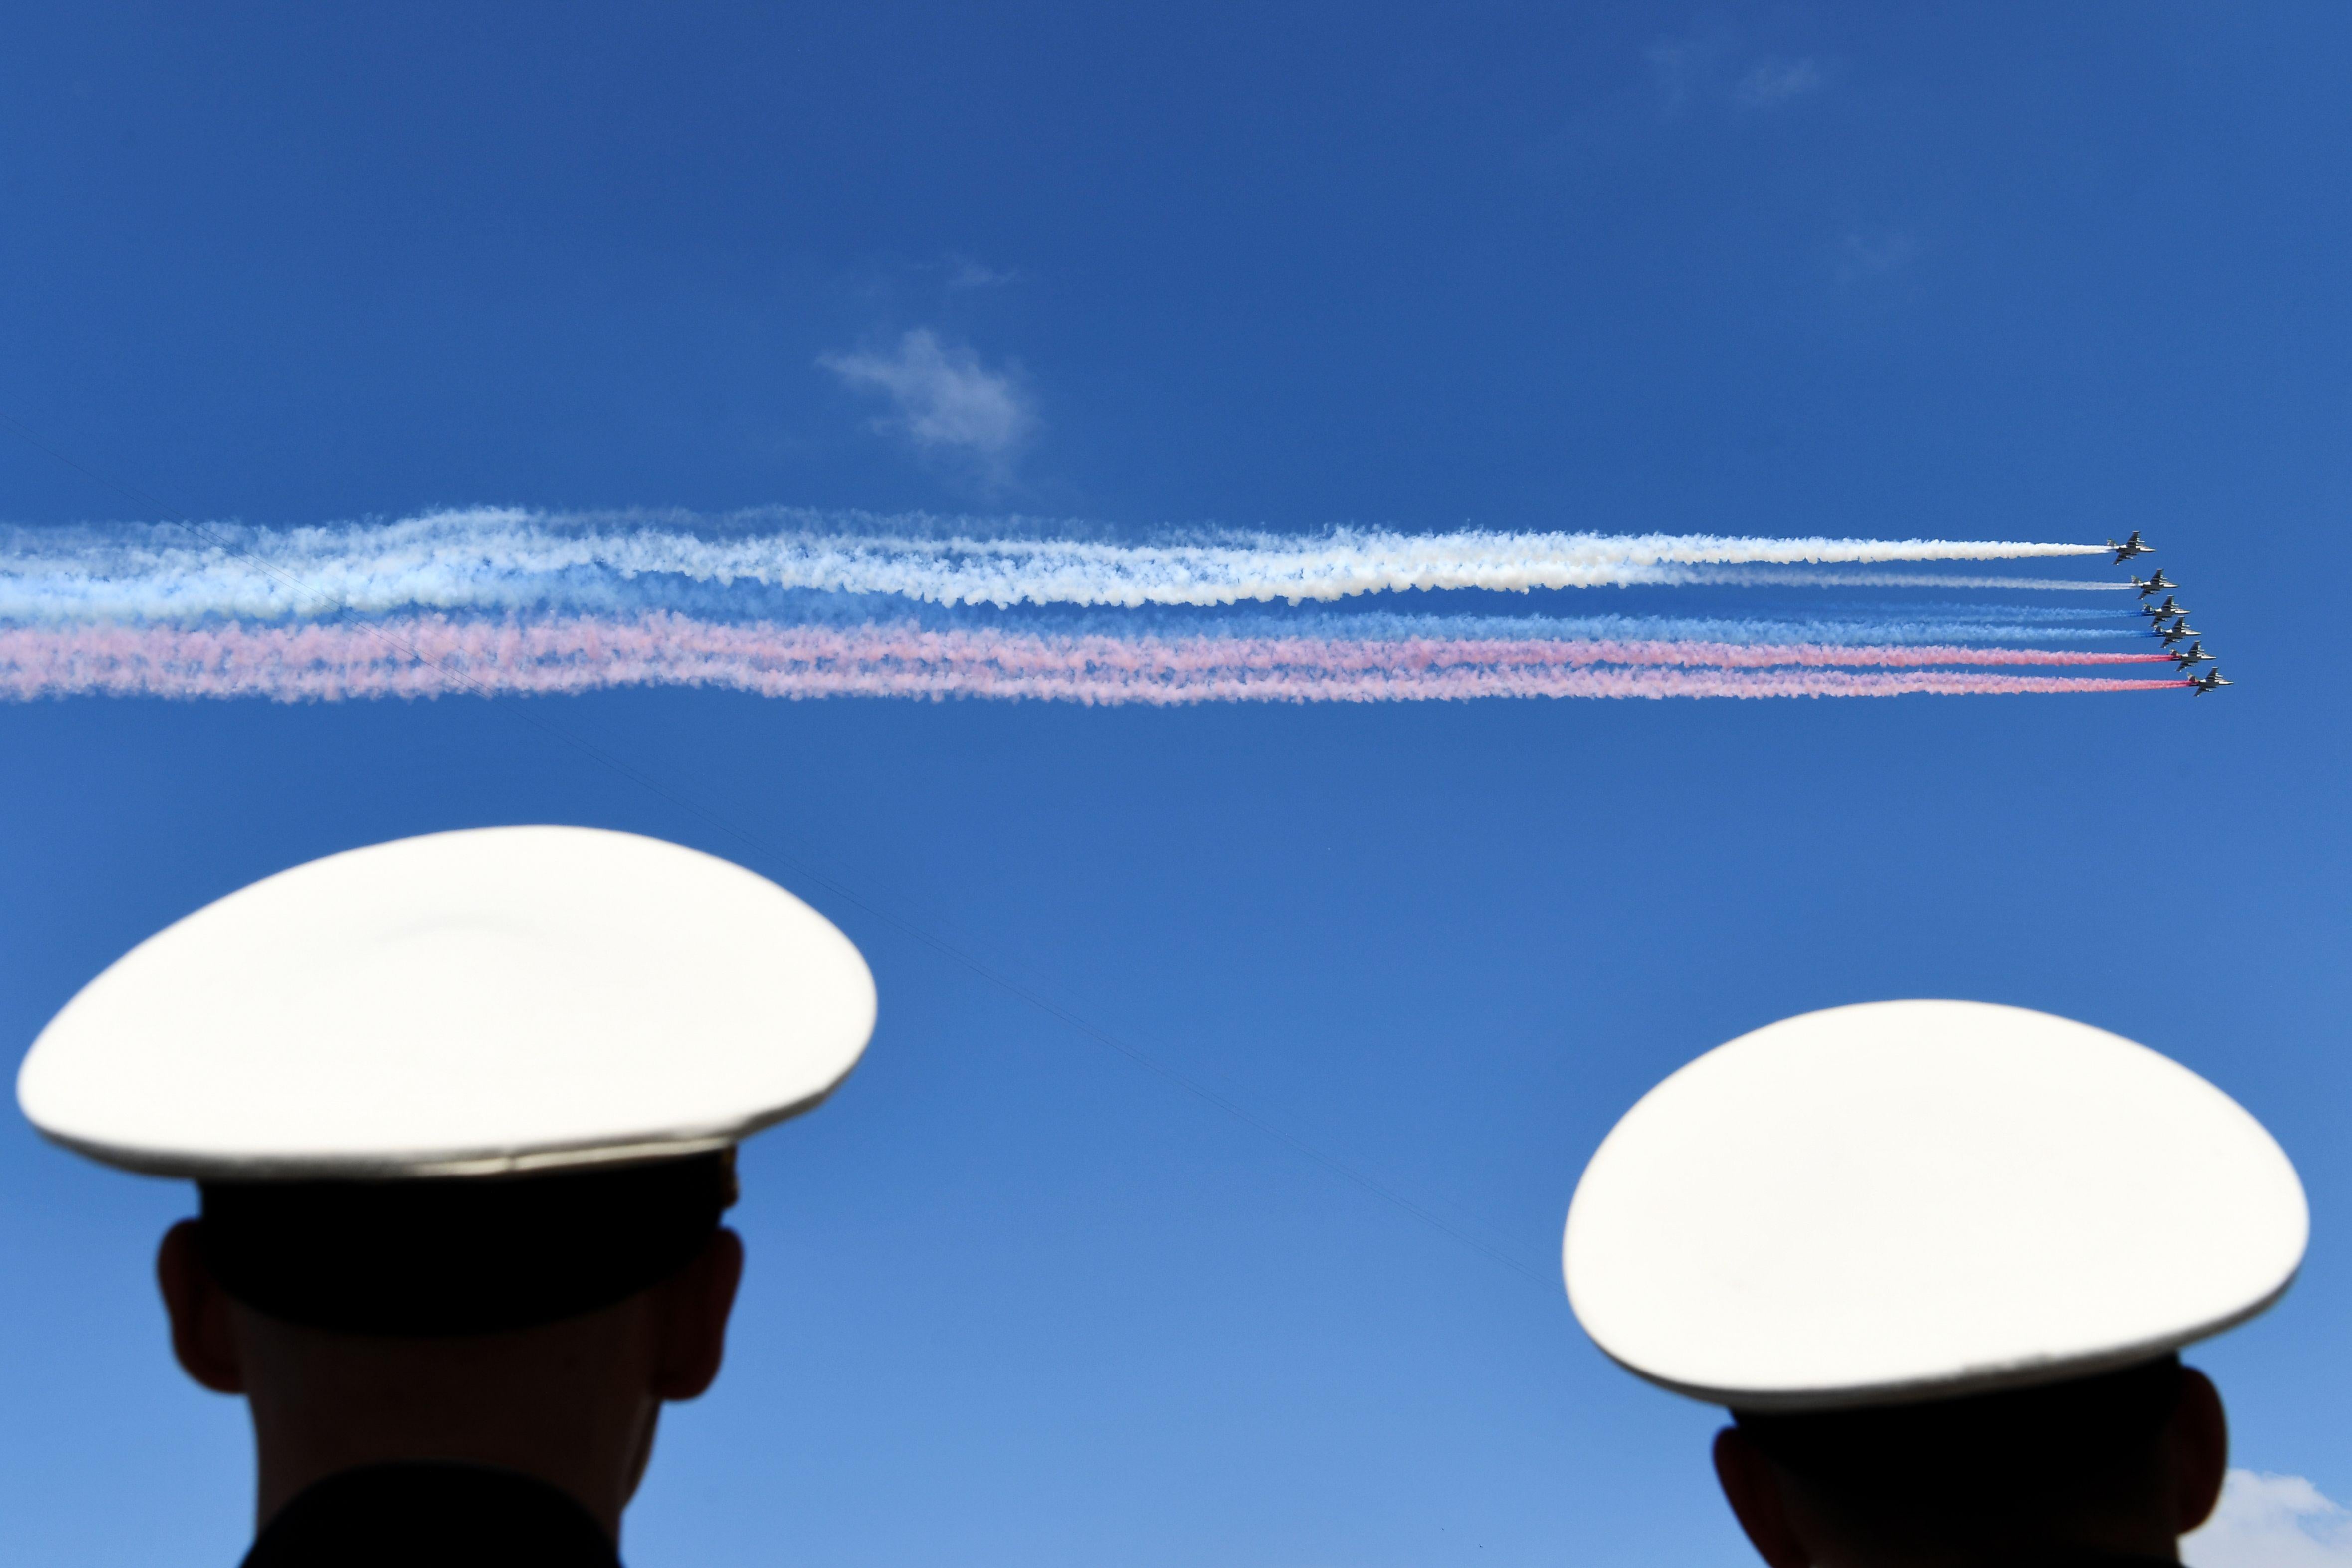 Russian aircraft release smoke in white, blue, and red, the colors of the Russian flag, while flying above the Neva River during the Navy Day parade in Saint Petersburg on July 29, 2018.